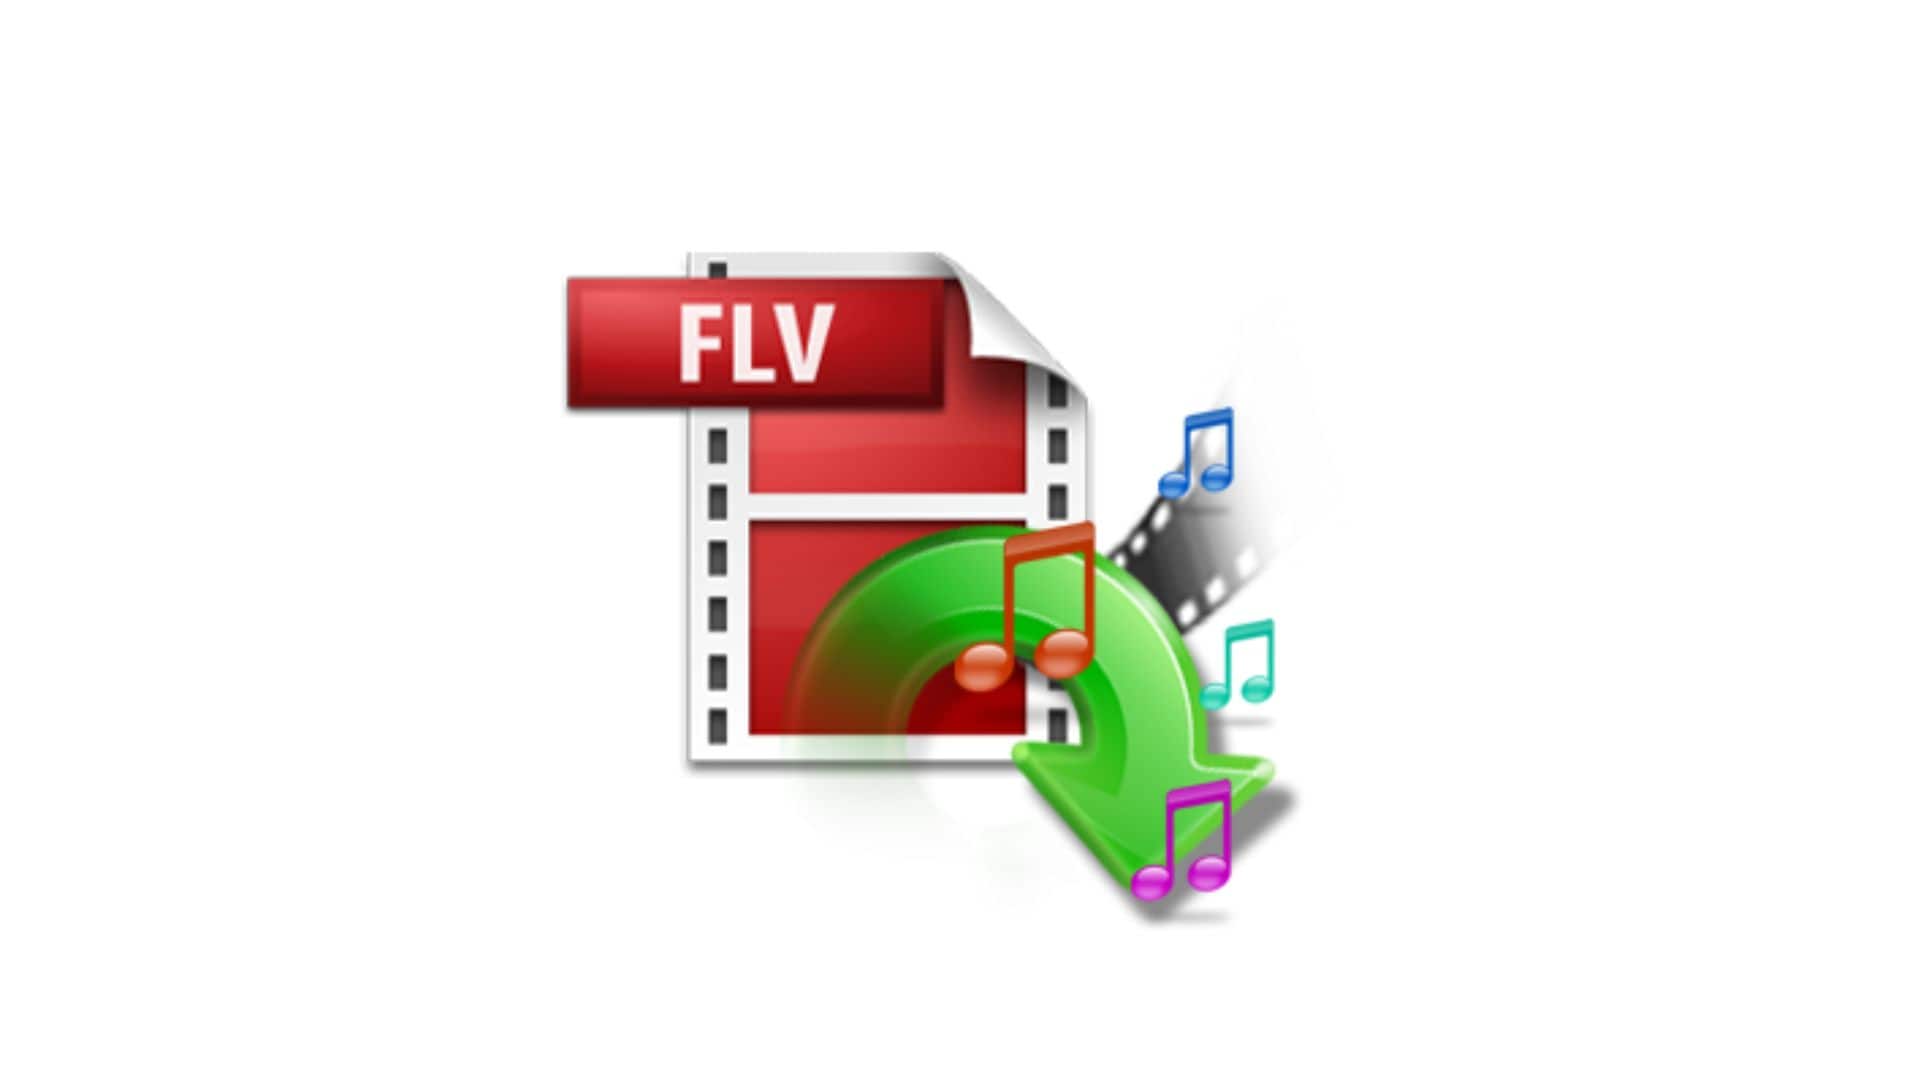 flv introduction theme